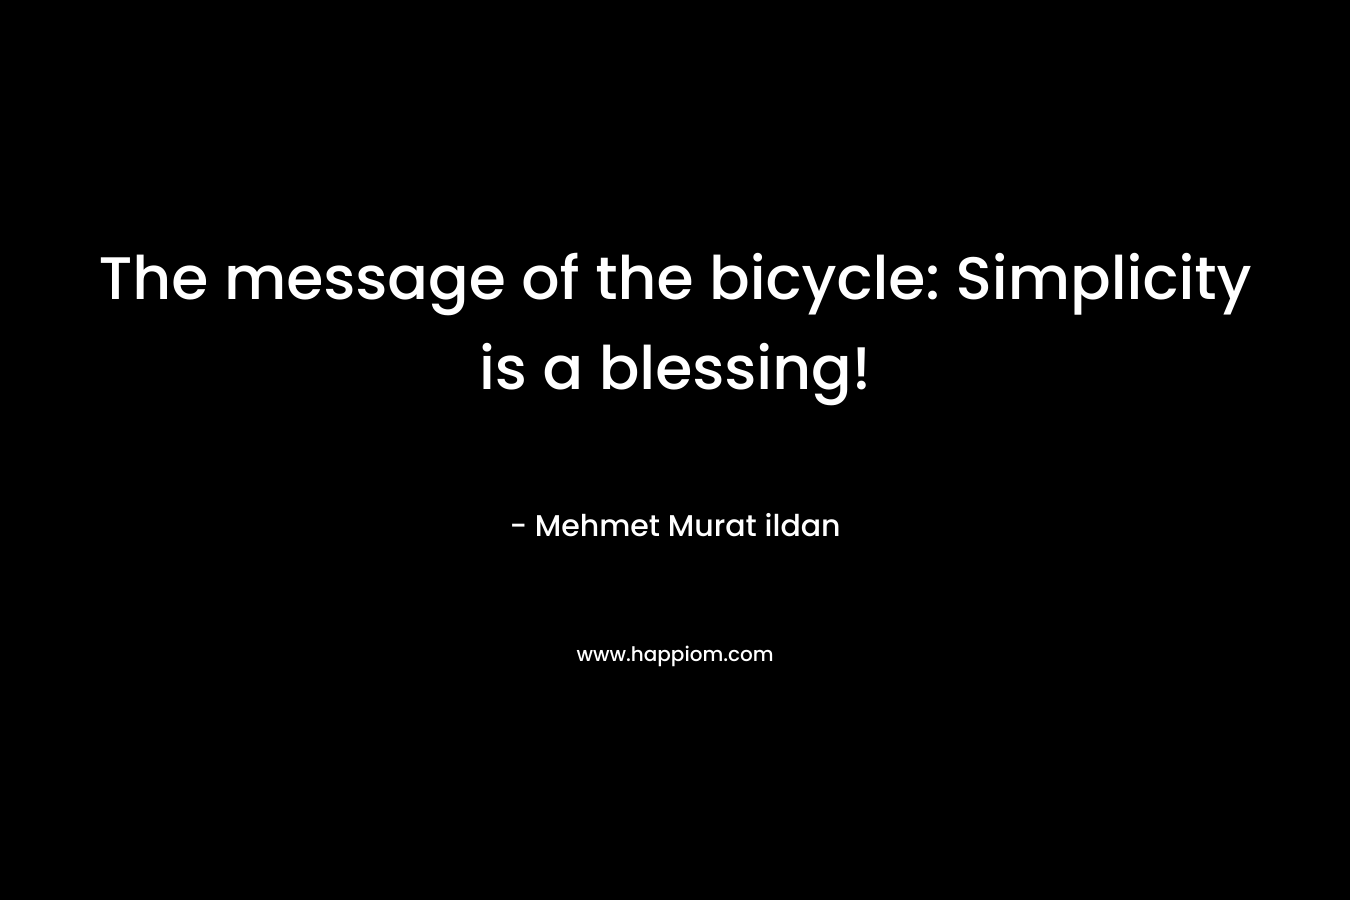 The message of the bicycle: Simplicity is a blessing! – Mehmet Murat ildan